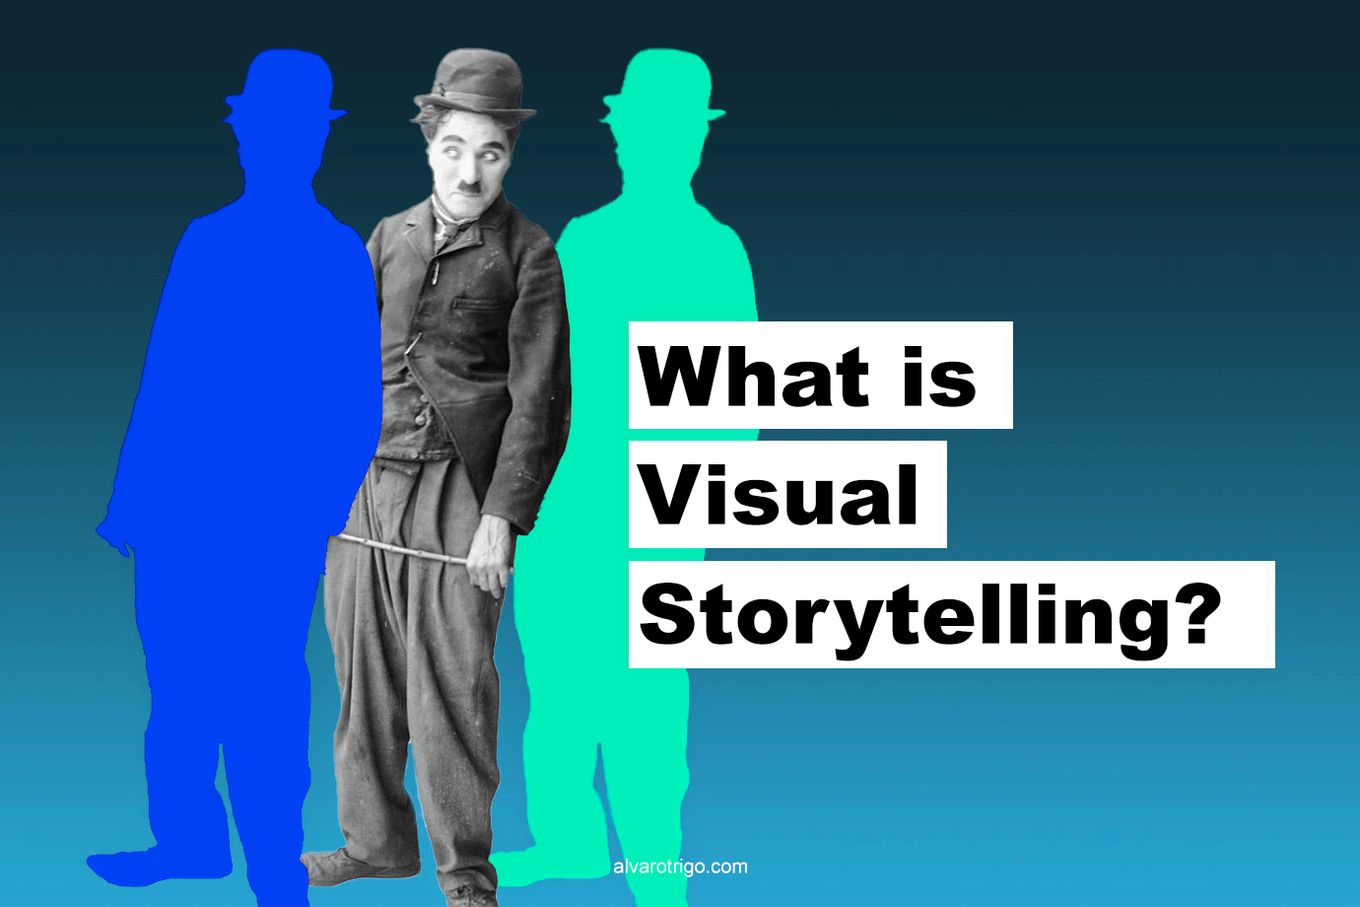 What Is Visual Storytelling?